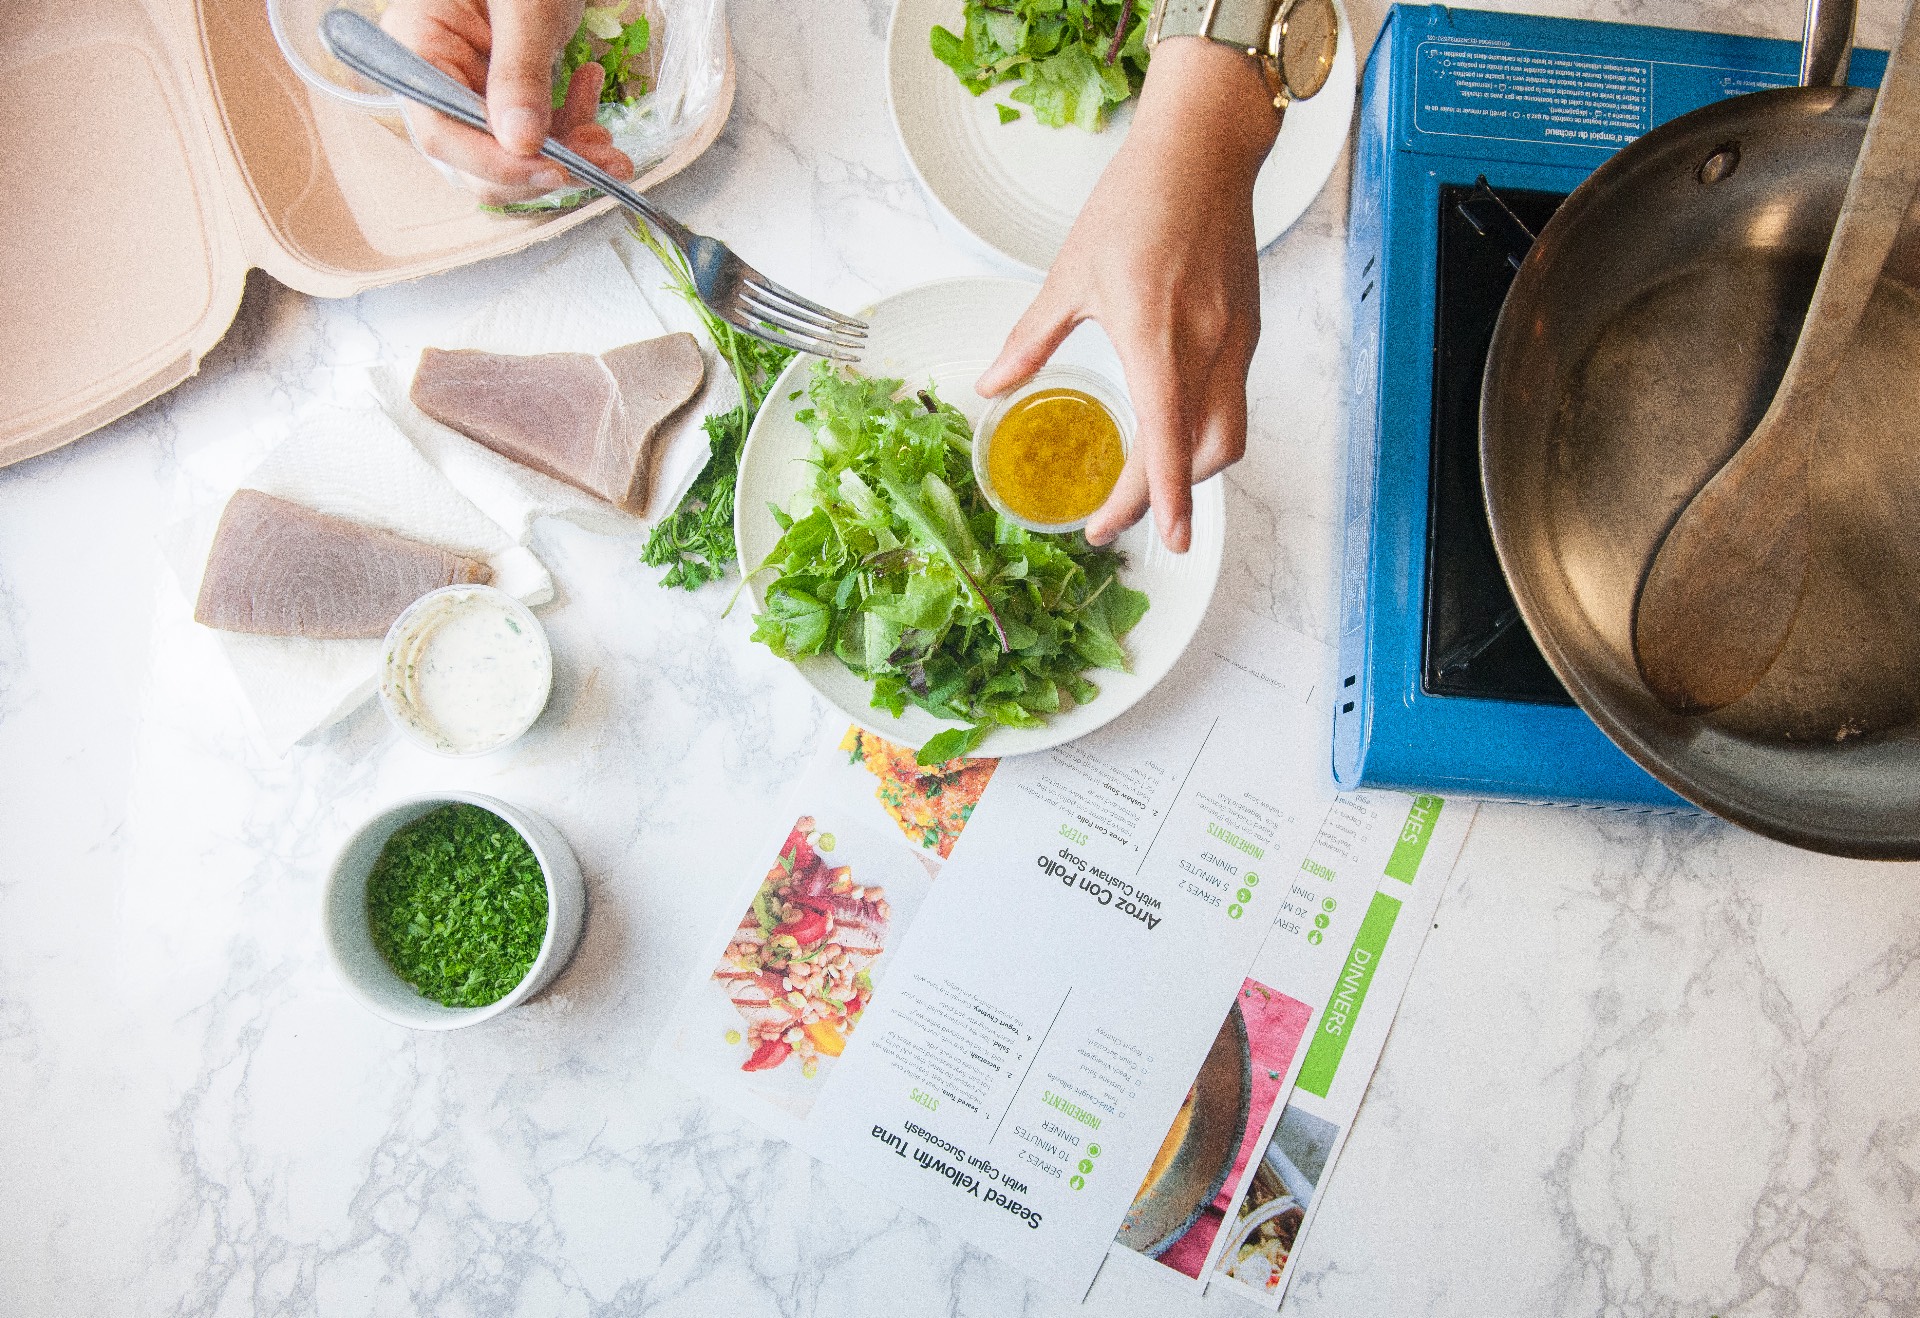 Indie Meal kits include recipes and prepped and chopped meal kits.